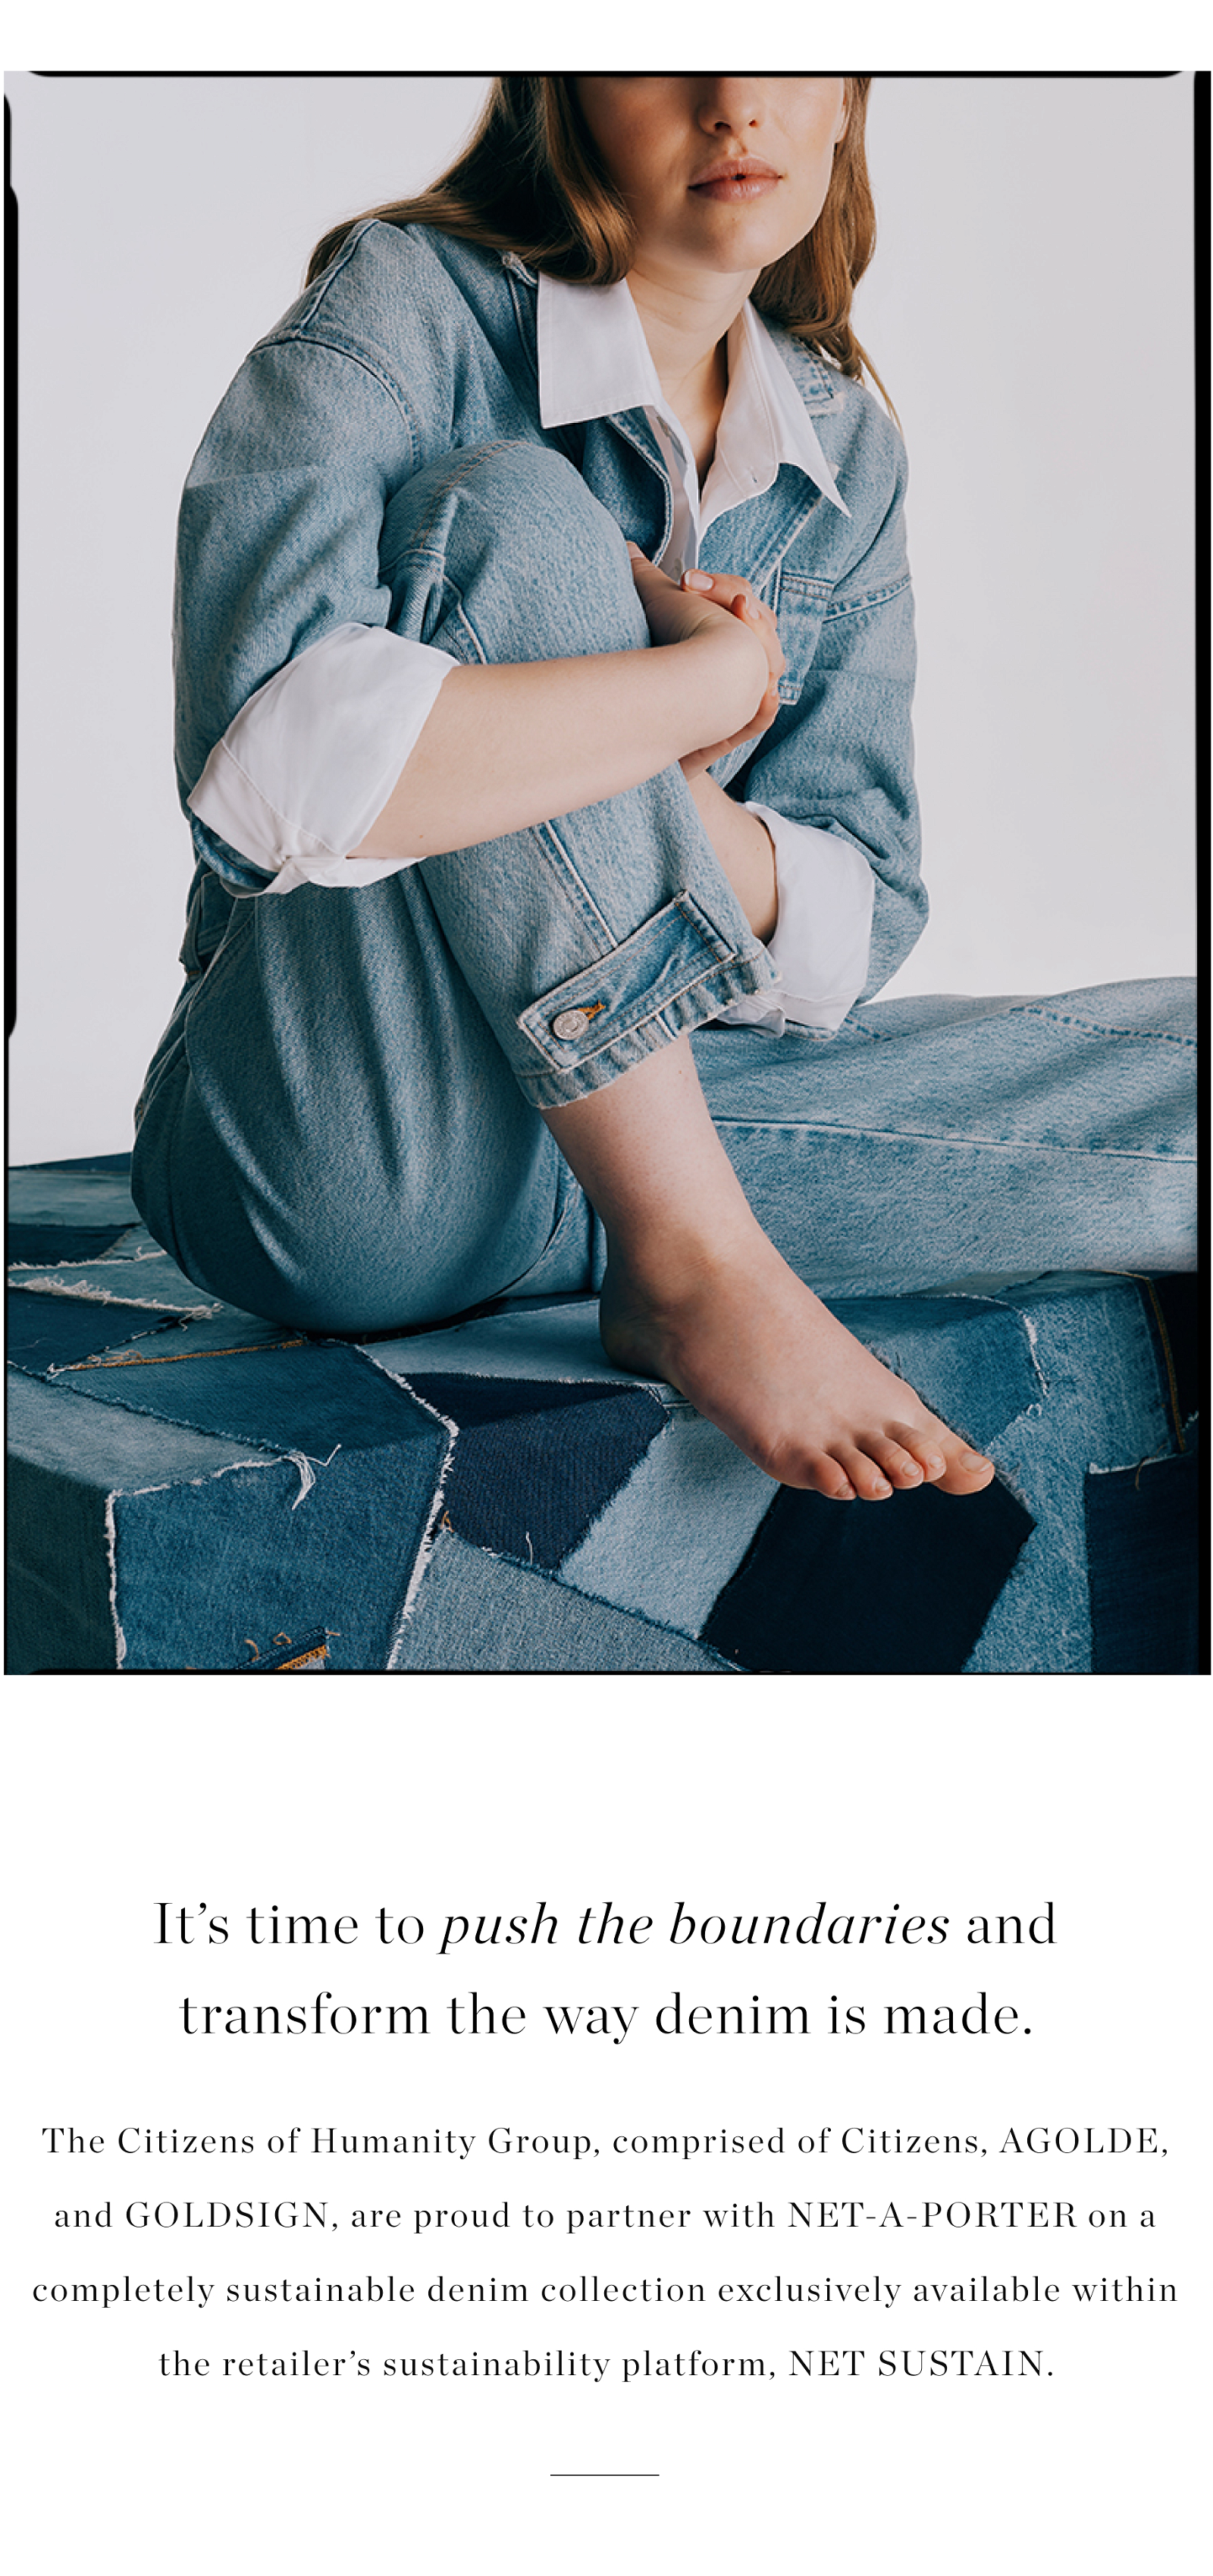 Citizens Of Humanity: Introducing Our Most Sustainable Denim